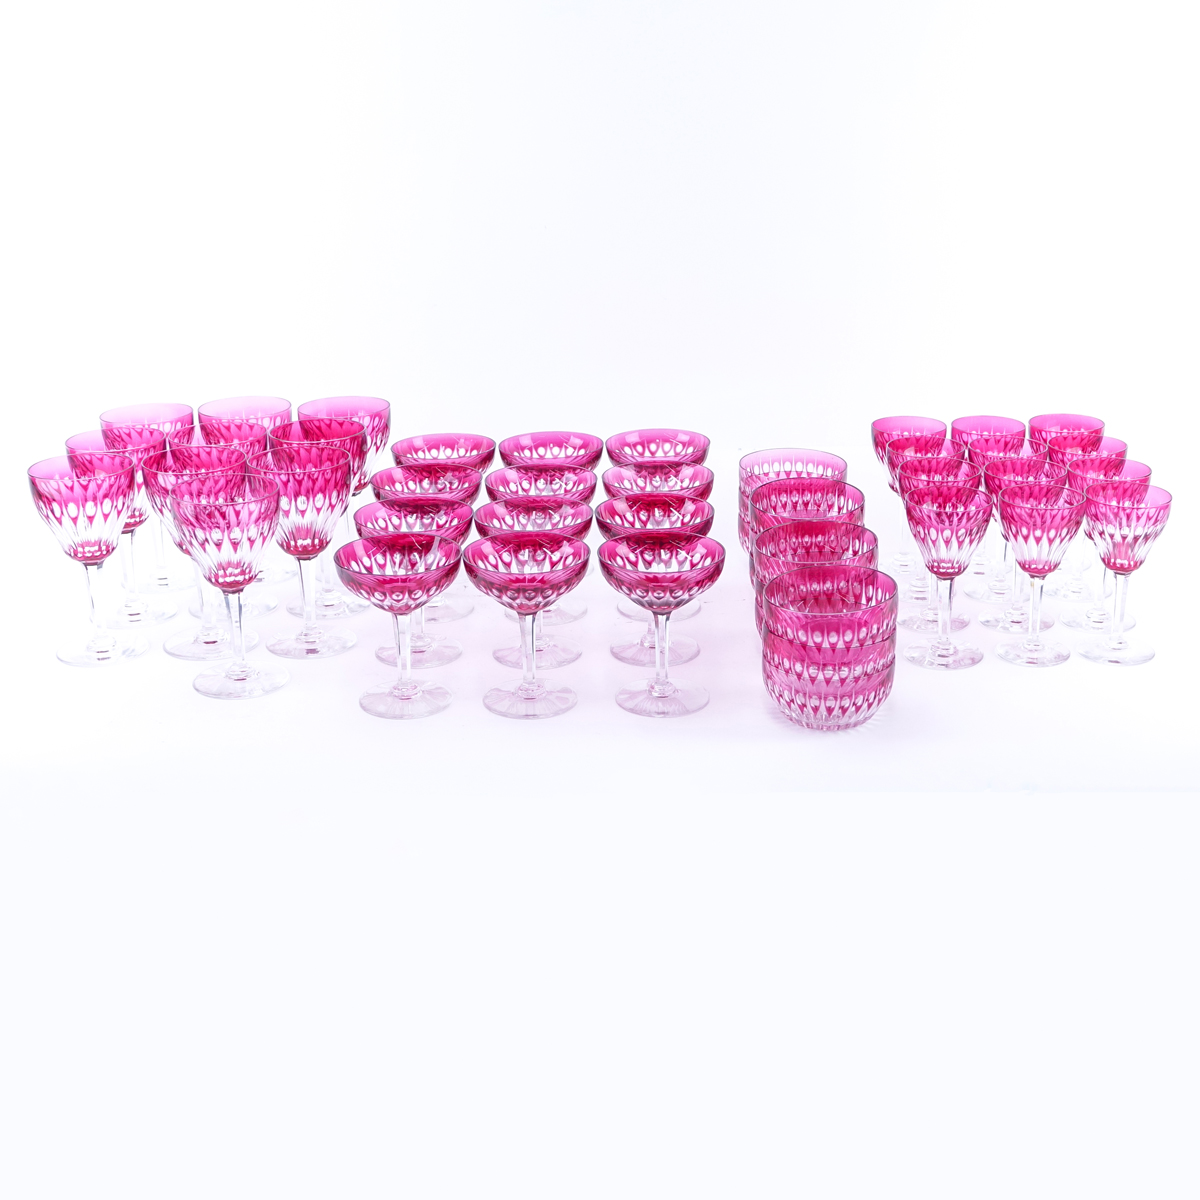 Forty Two (42) Piece Bohemian Style Cranberry to Clear Stemware. Includes: 9 red wine glasses 6-3/4" H, 12 white wines glasses 5-1/2" H, 9 champagne glasses 5" H, and 12 bowls 4" Dia.